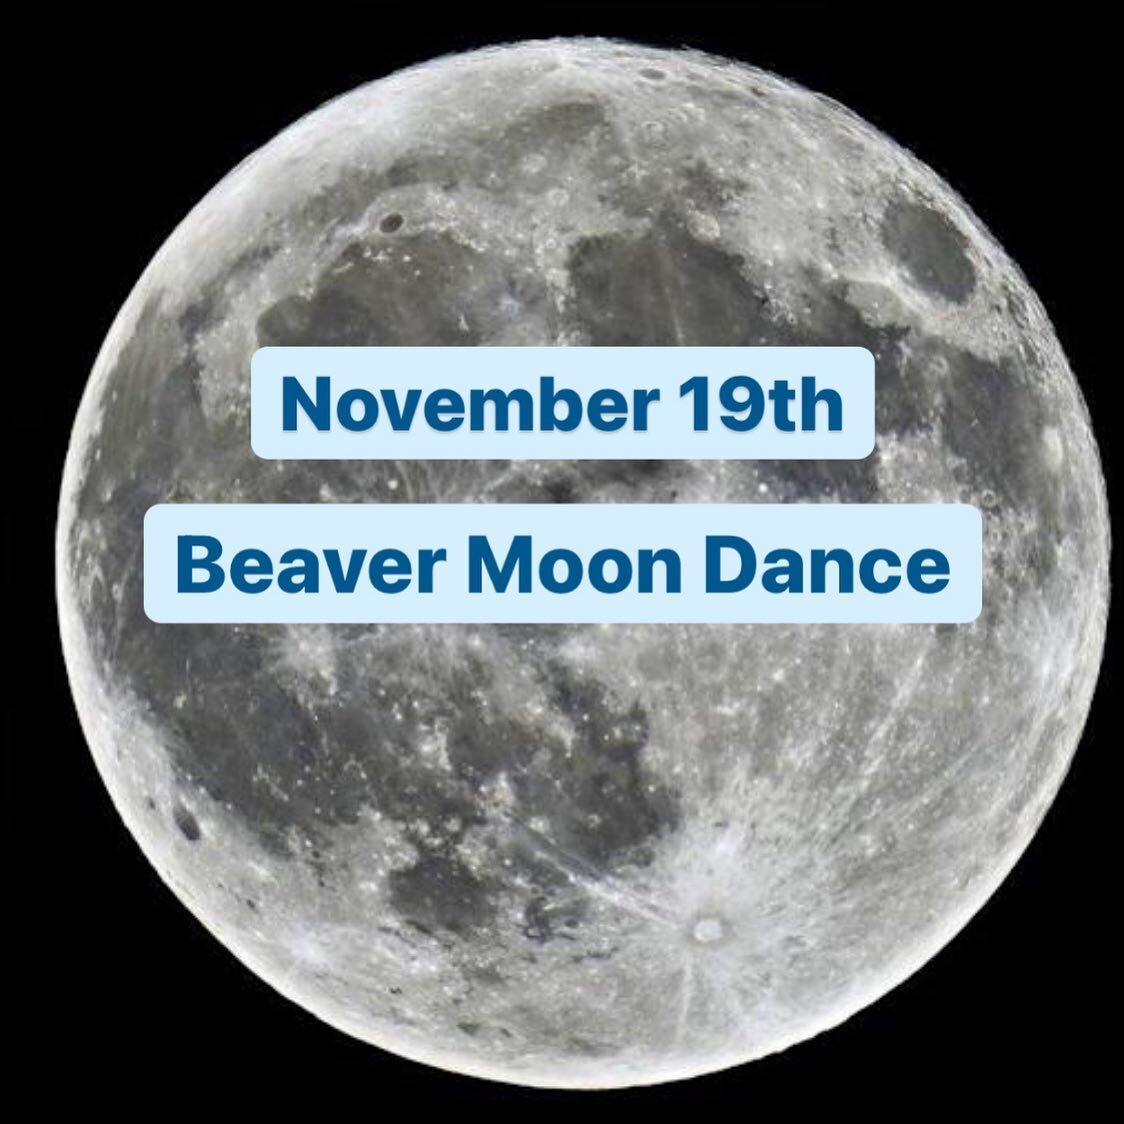 My highly esteemed comrade, @liljesphotography and I have been dreaming and doing.
.
I have a desire to be a part of bringing community together. And I had a vision of a dance on the next full moon. The Beaver Moon. It symbolizes being architects of 